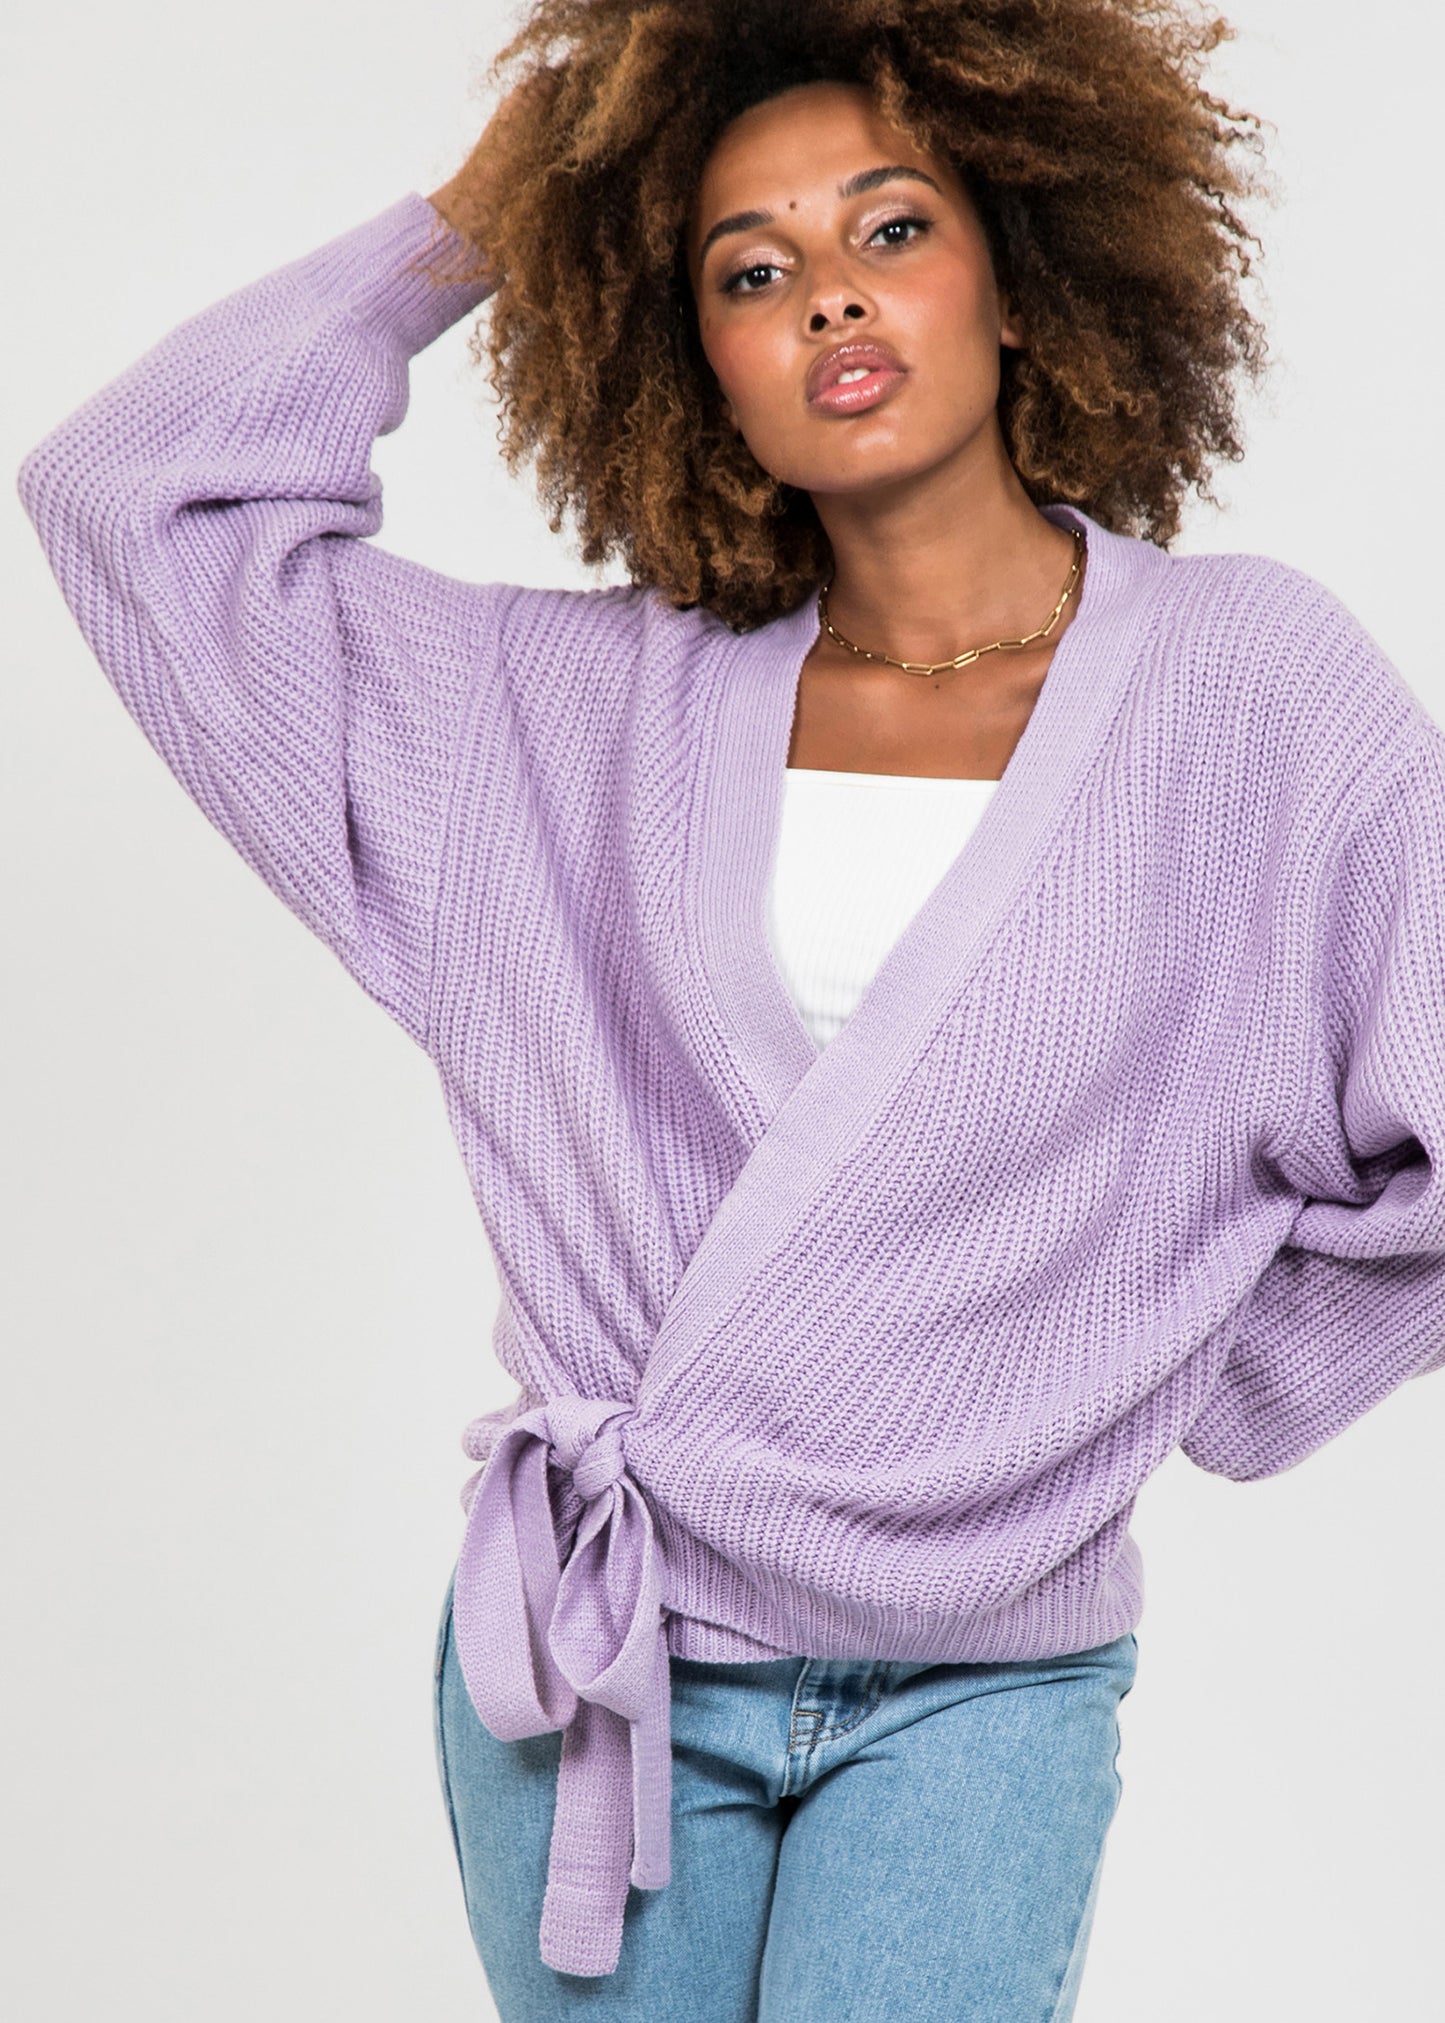 Wrap cardigan with tie front in purple